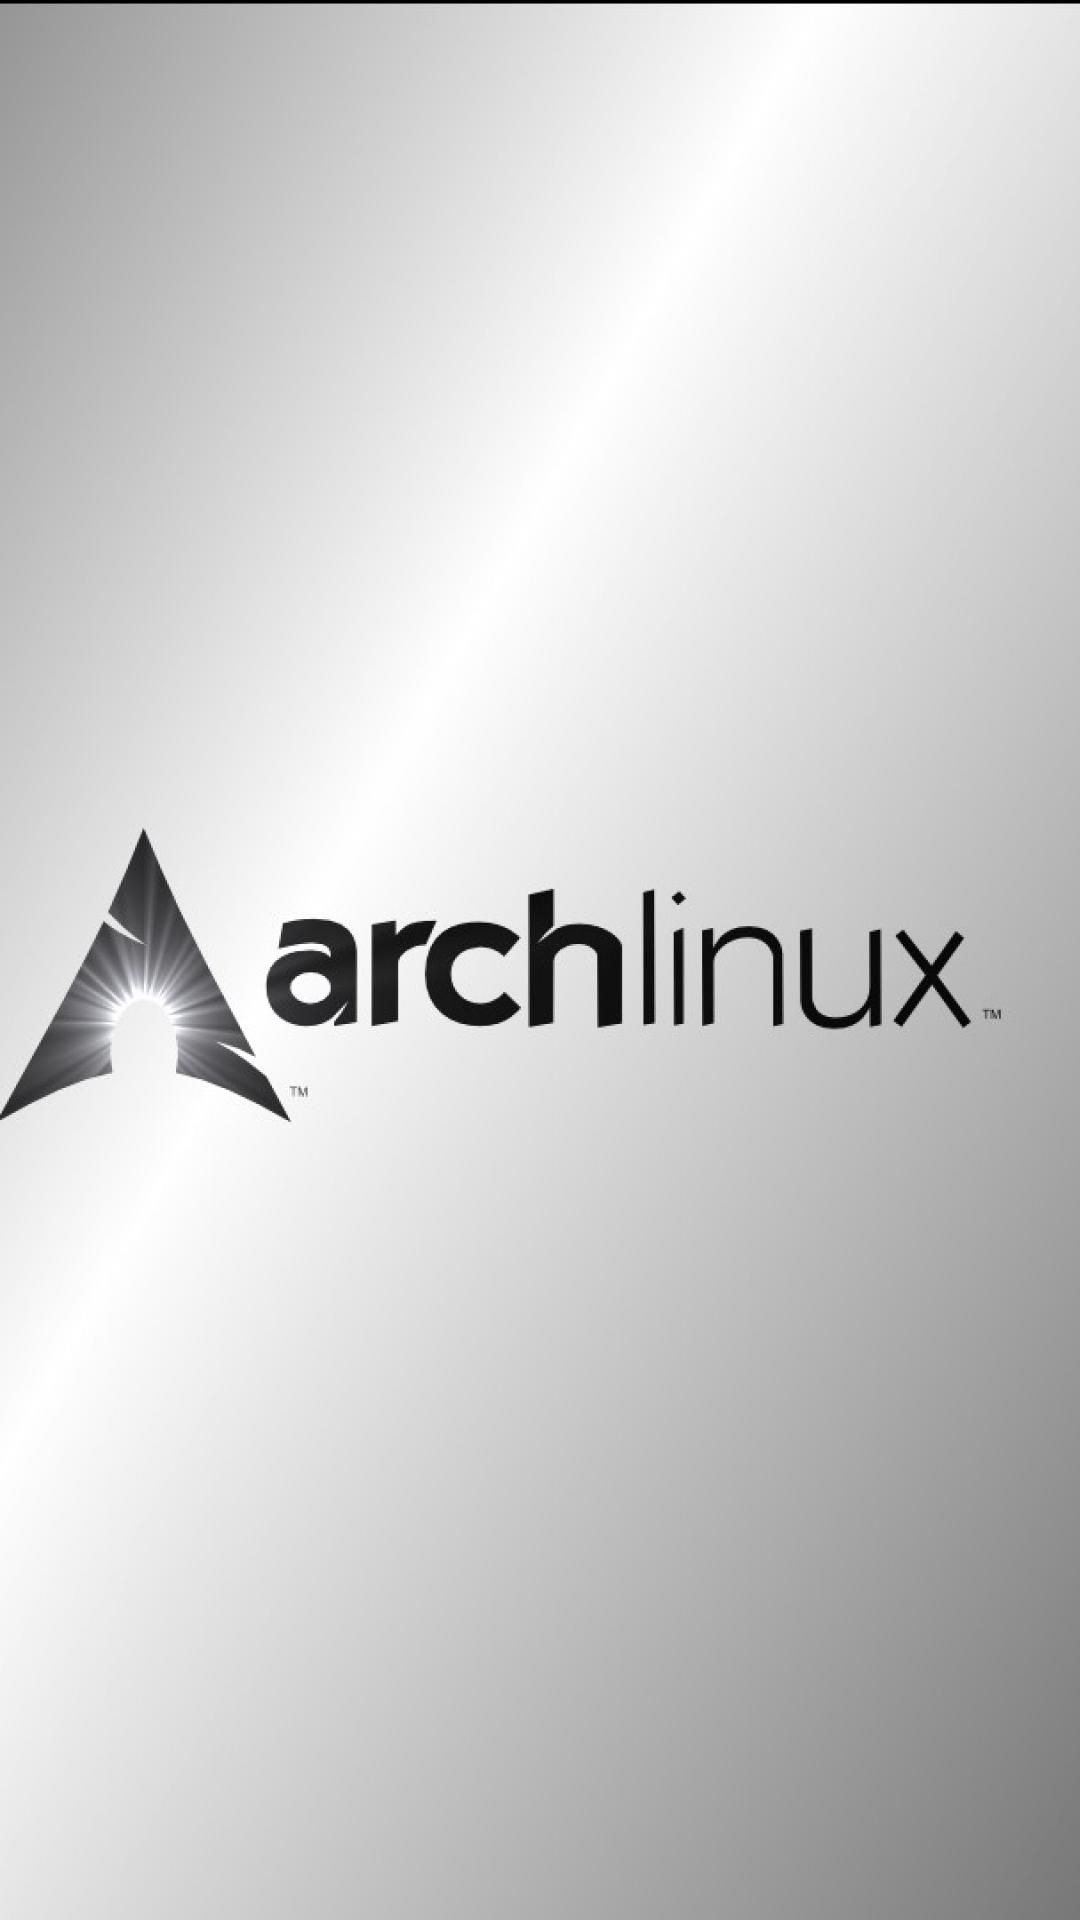 Arch Linux Wallpaper Android .wallpapertip.com